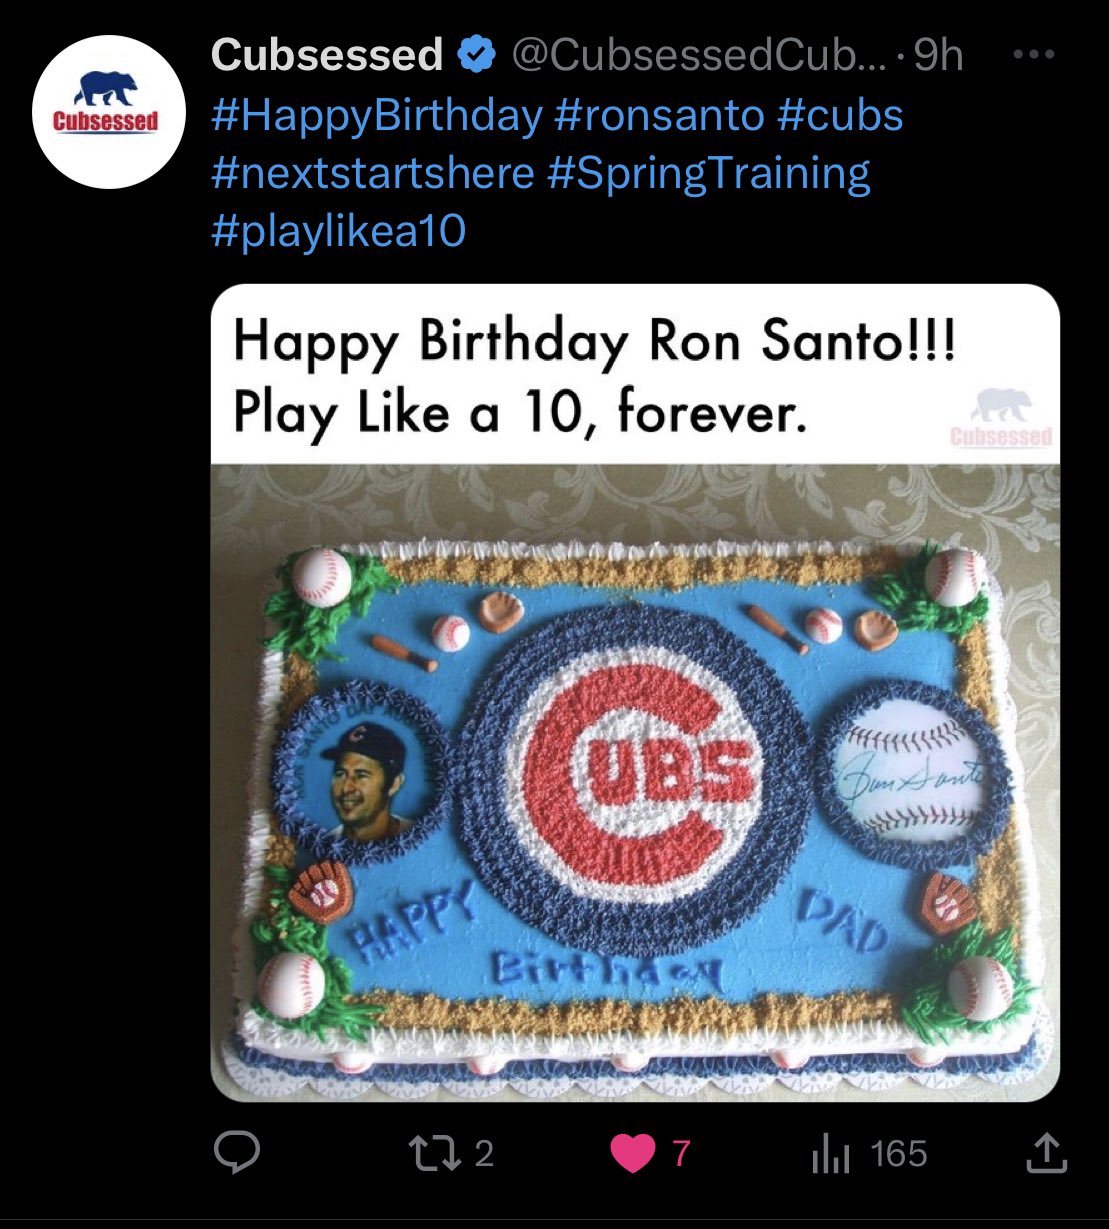 Cubs win 10-8, those 10 runs are for Ron Santo today, happy birthday Ron, we miss you, R.I.P.  